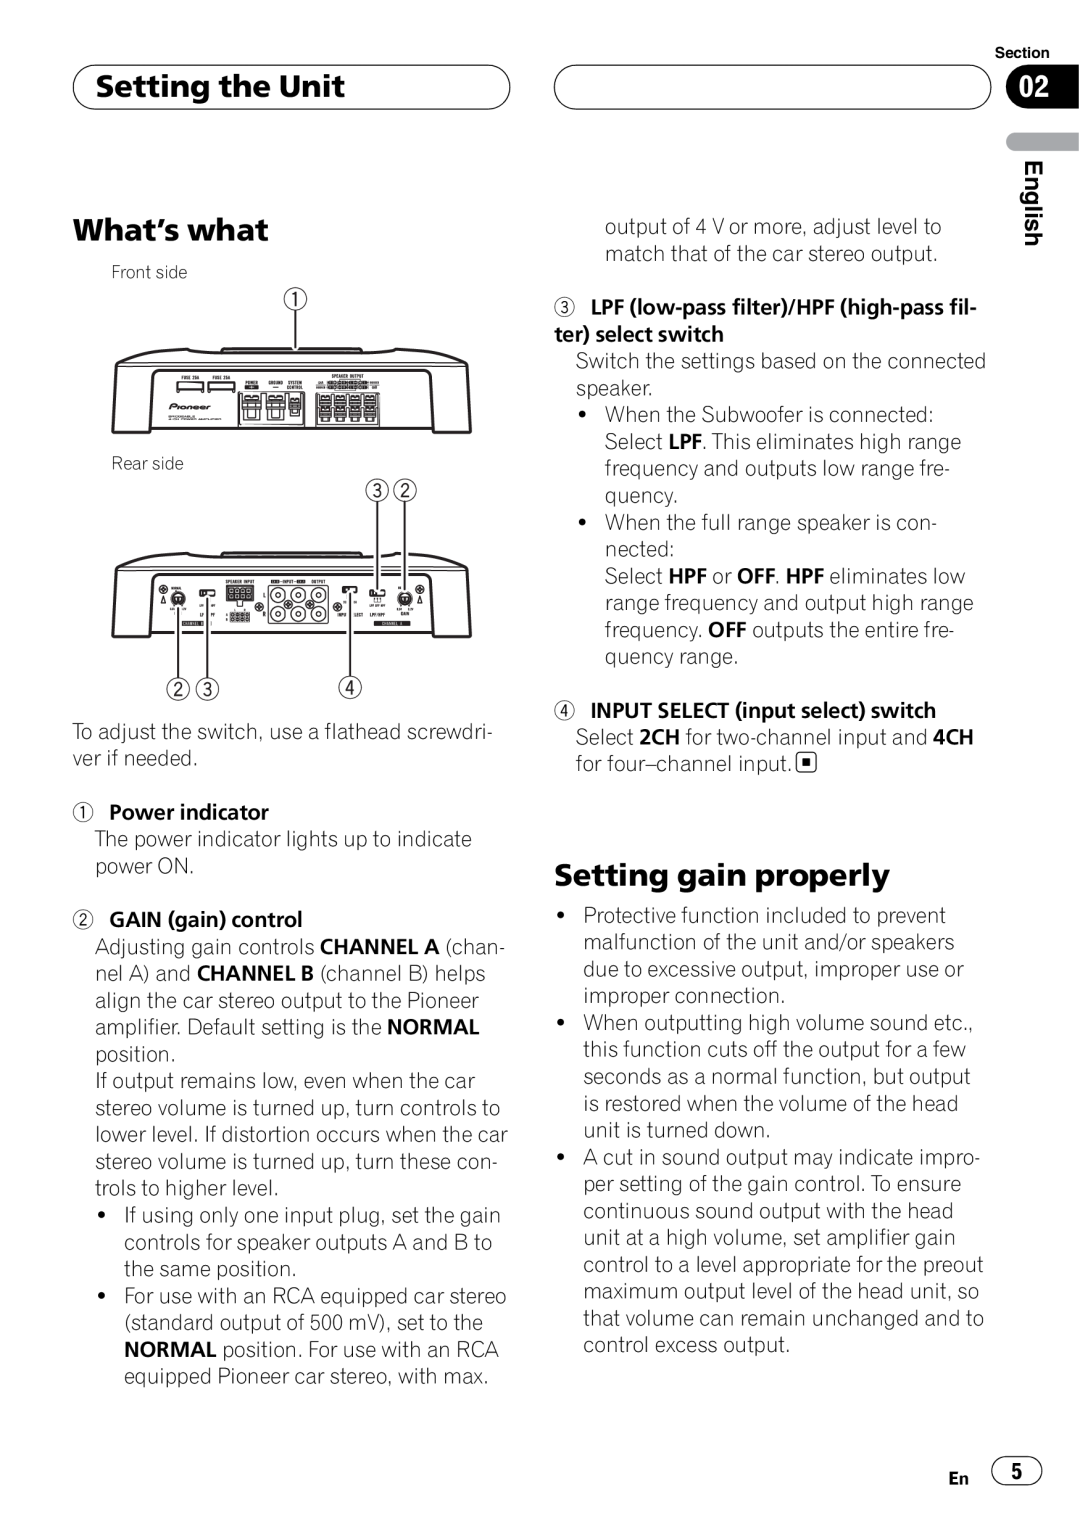 Pioneer GM-6400F owner manual Setting the Unit What’s what, Setting gain properly 